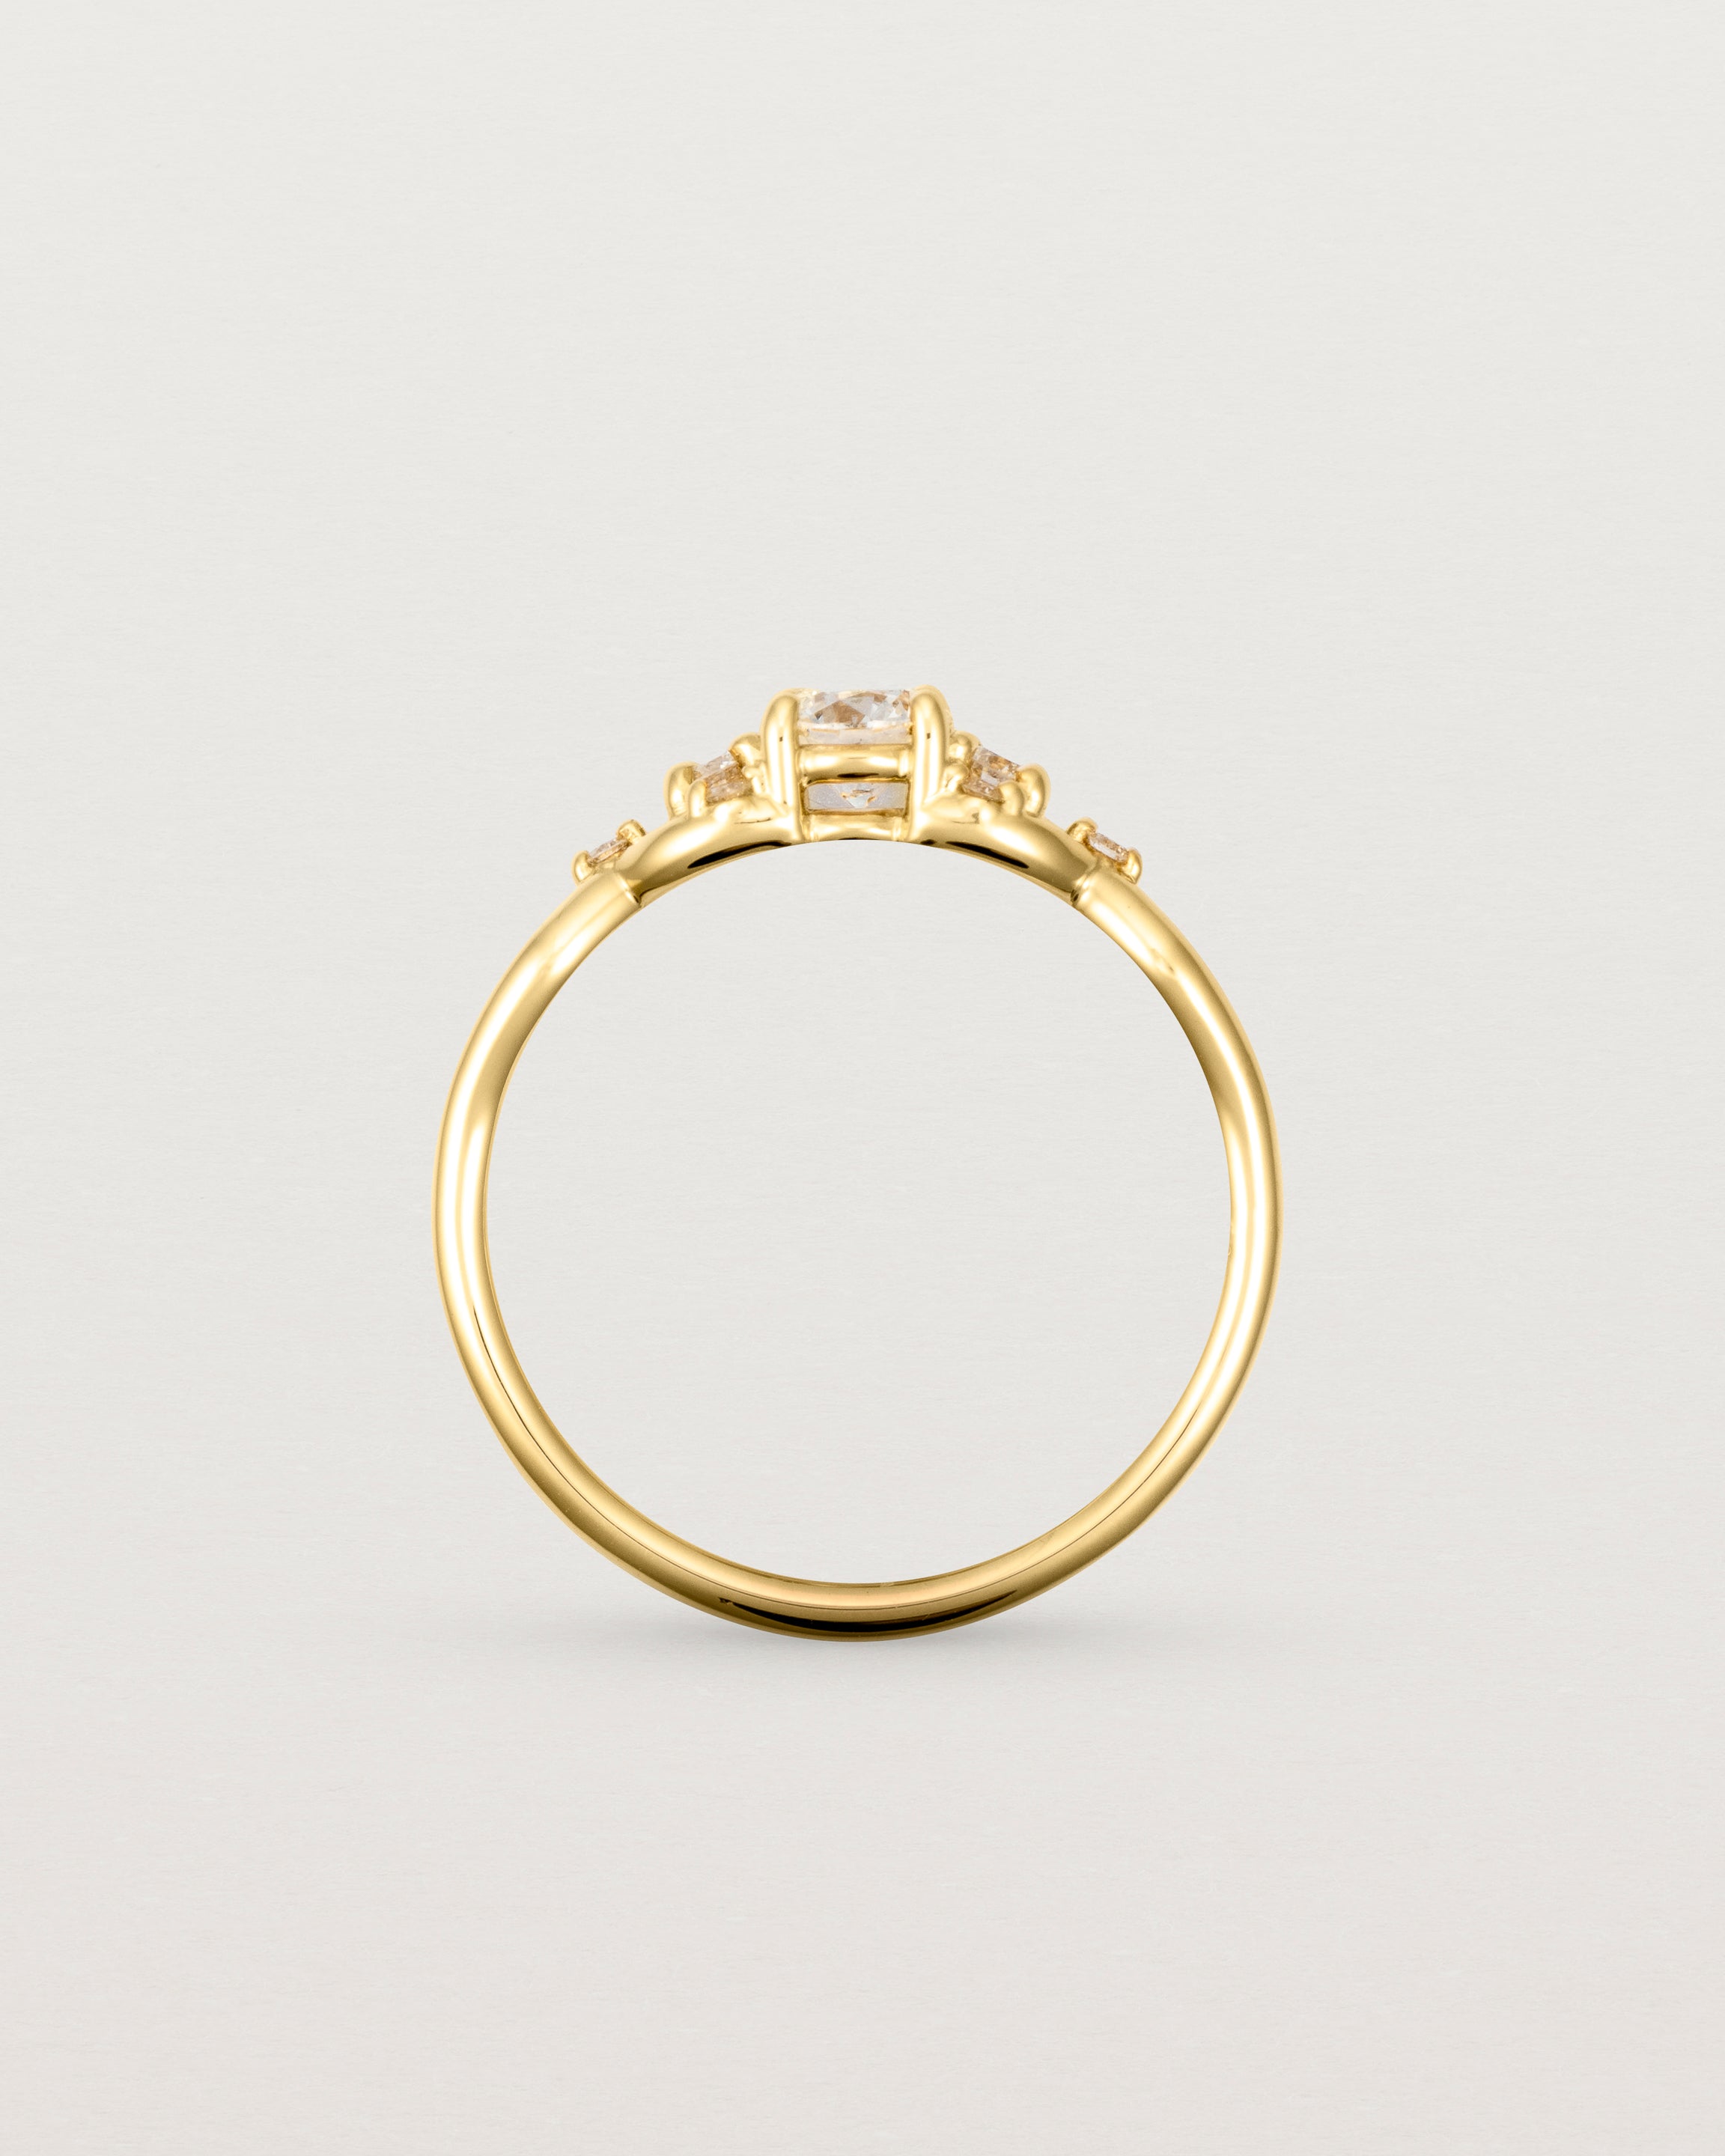 A vintage inspired yellow gold ring featuring white diamonds